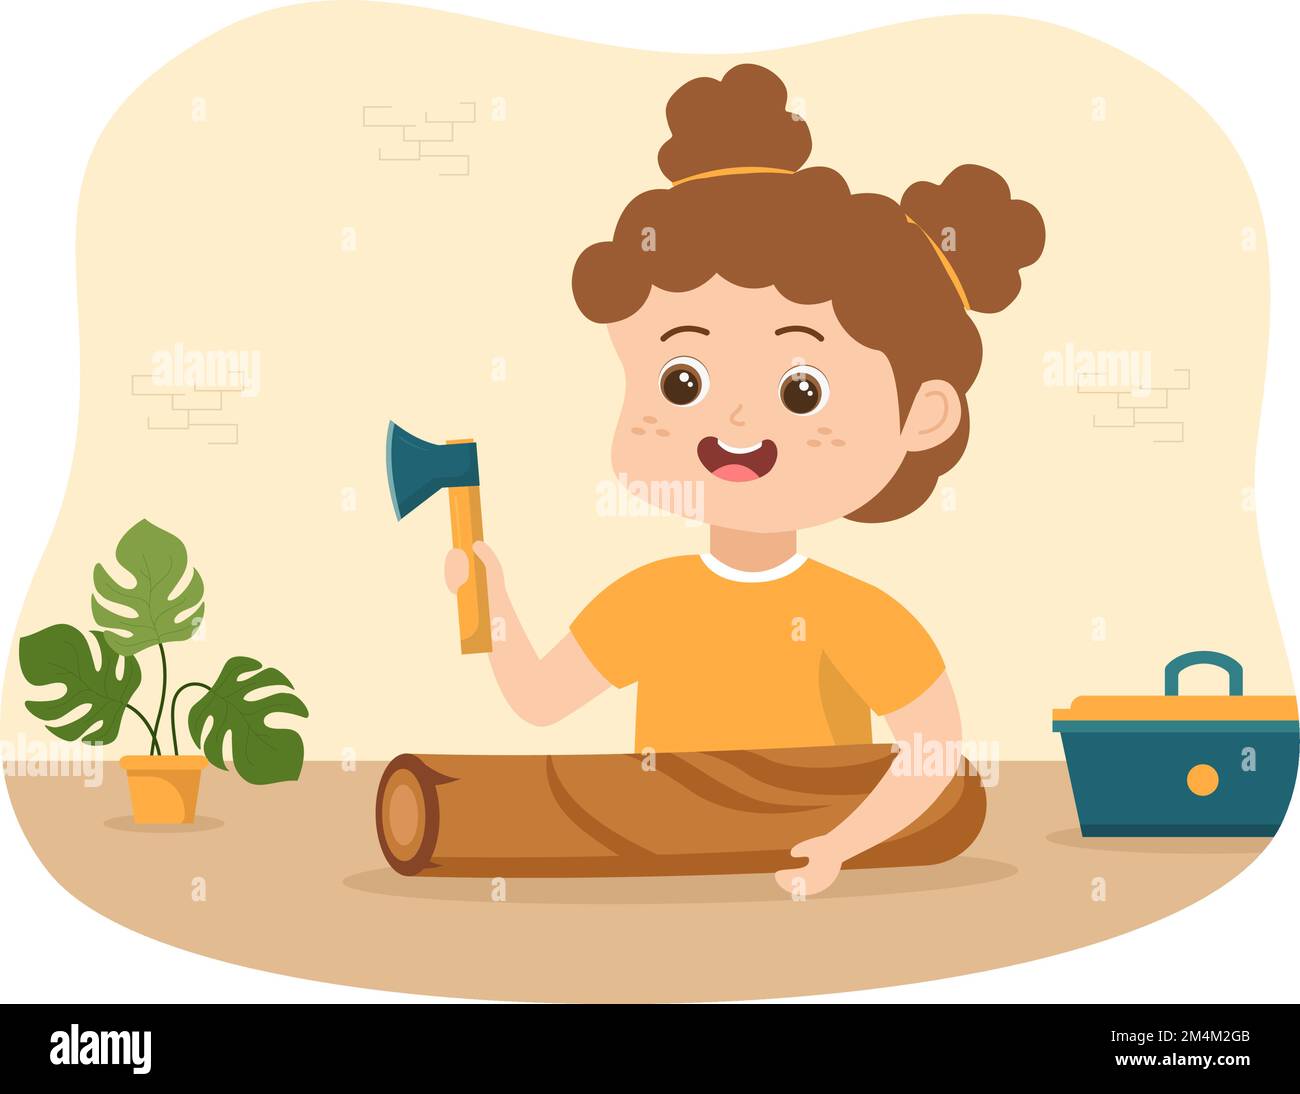 Woodworking with Wood Cutting by Modern Craftsman and Worker using Tools Set in Flat Cartoon Hand Drawn Template Illustration Stock Vector